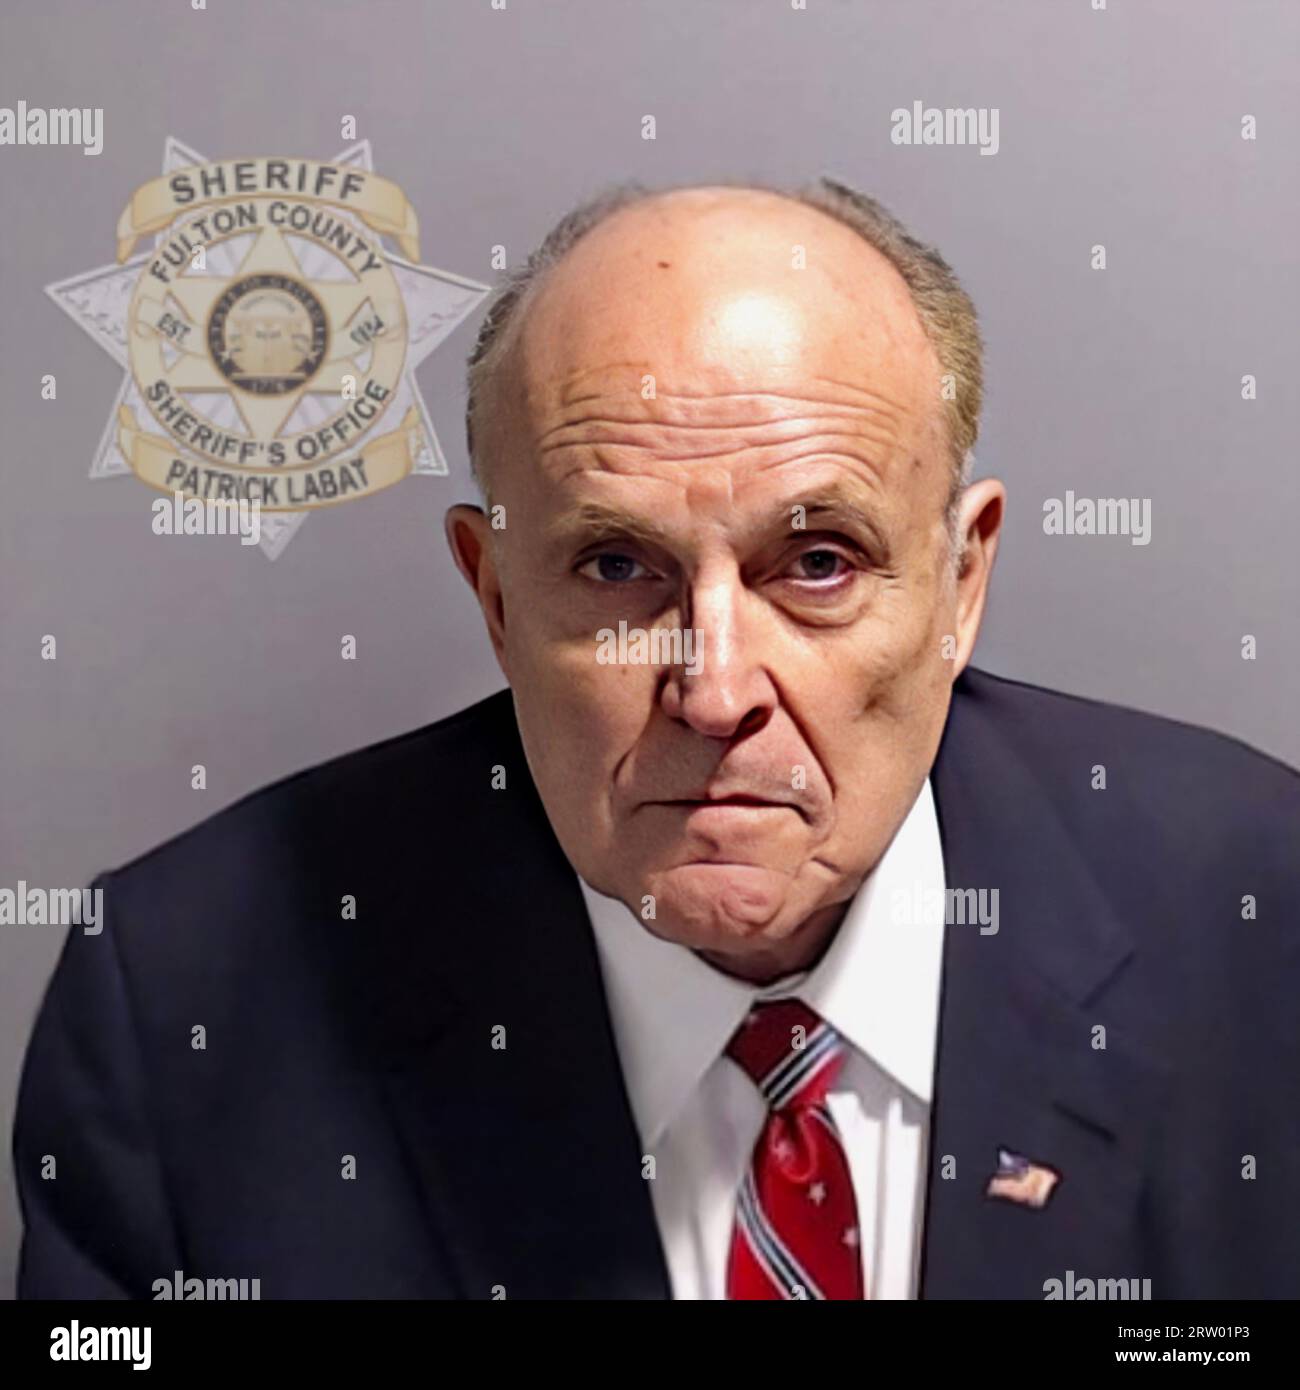 2023 , 23 august , Atlanta , Georgia , USA : The Ex-New York Mayor RUDOLPH GIULIANI ( Rudy , born 1944 ) mugshot . Giuliani was arrested with Ex 45Th President of United States  DONALD John TRUMP . The mugshot was released after arrest in Atlanta , FULTON COUNTY Patrick Labat SHERIFF OFFICE . Trump on charges of plotting to overturn the State's 2020 Election results in an arrest that saw the first ever mugshot of a former US president . Also Giuliani was indicted in the prosecution related to the 2020 election in Georgia , along with 18 other people . Unknown photographer . - MUG SHOT - MUGSHO Stock Photo